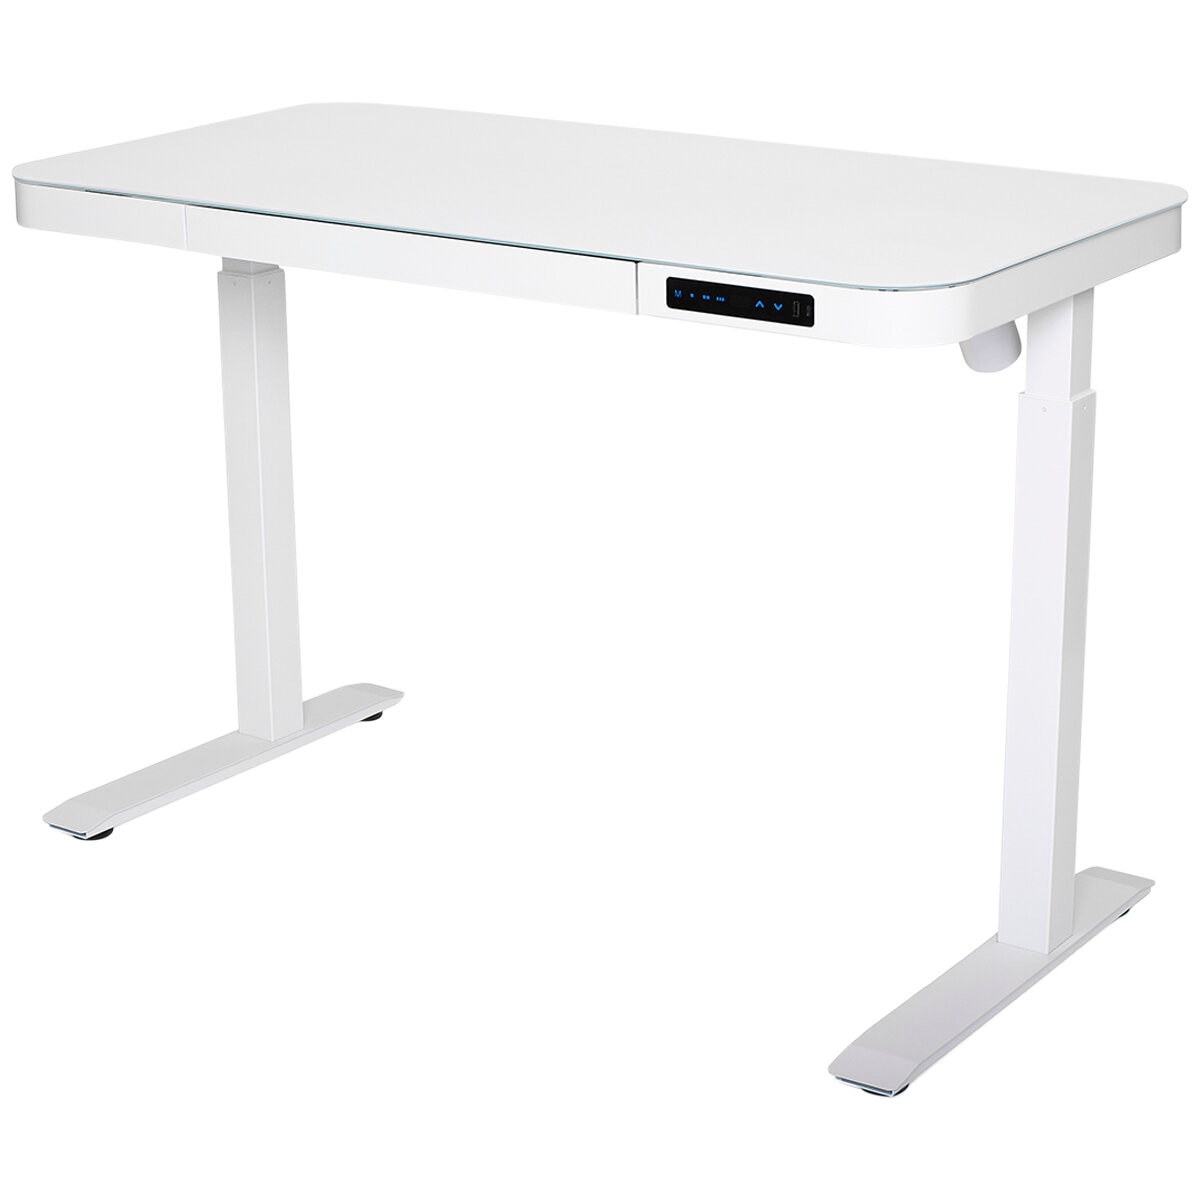 Seville Classics Air Lift Height Adjustable Electric Desk with Drawer/